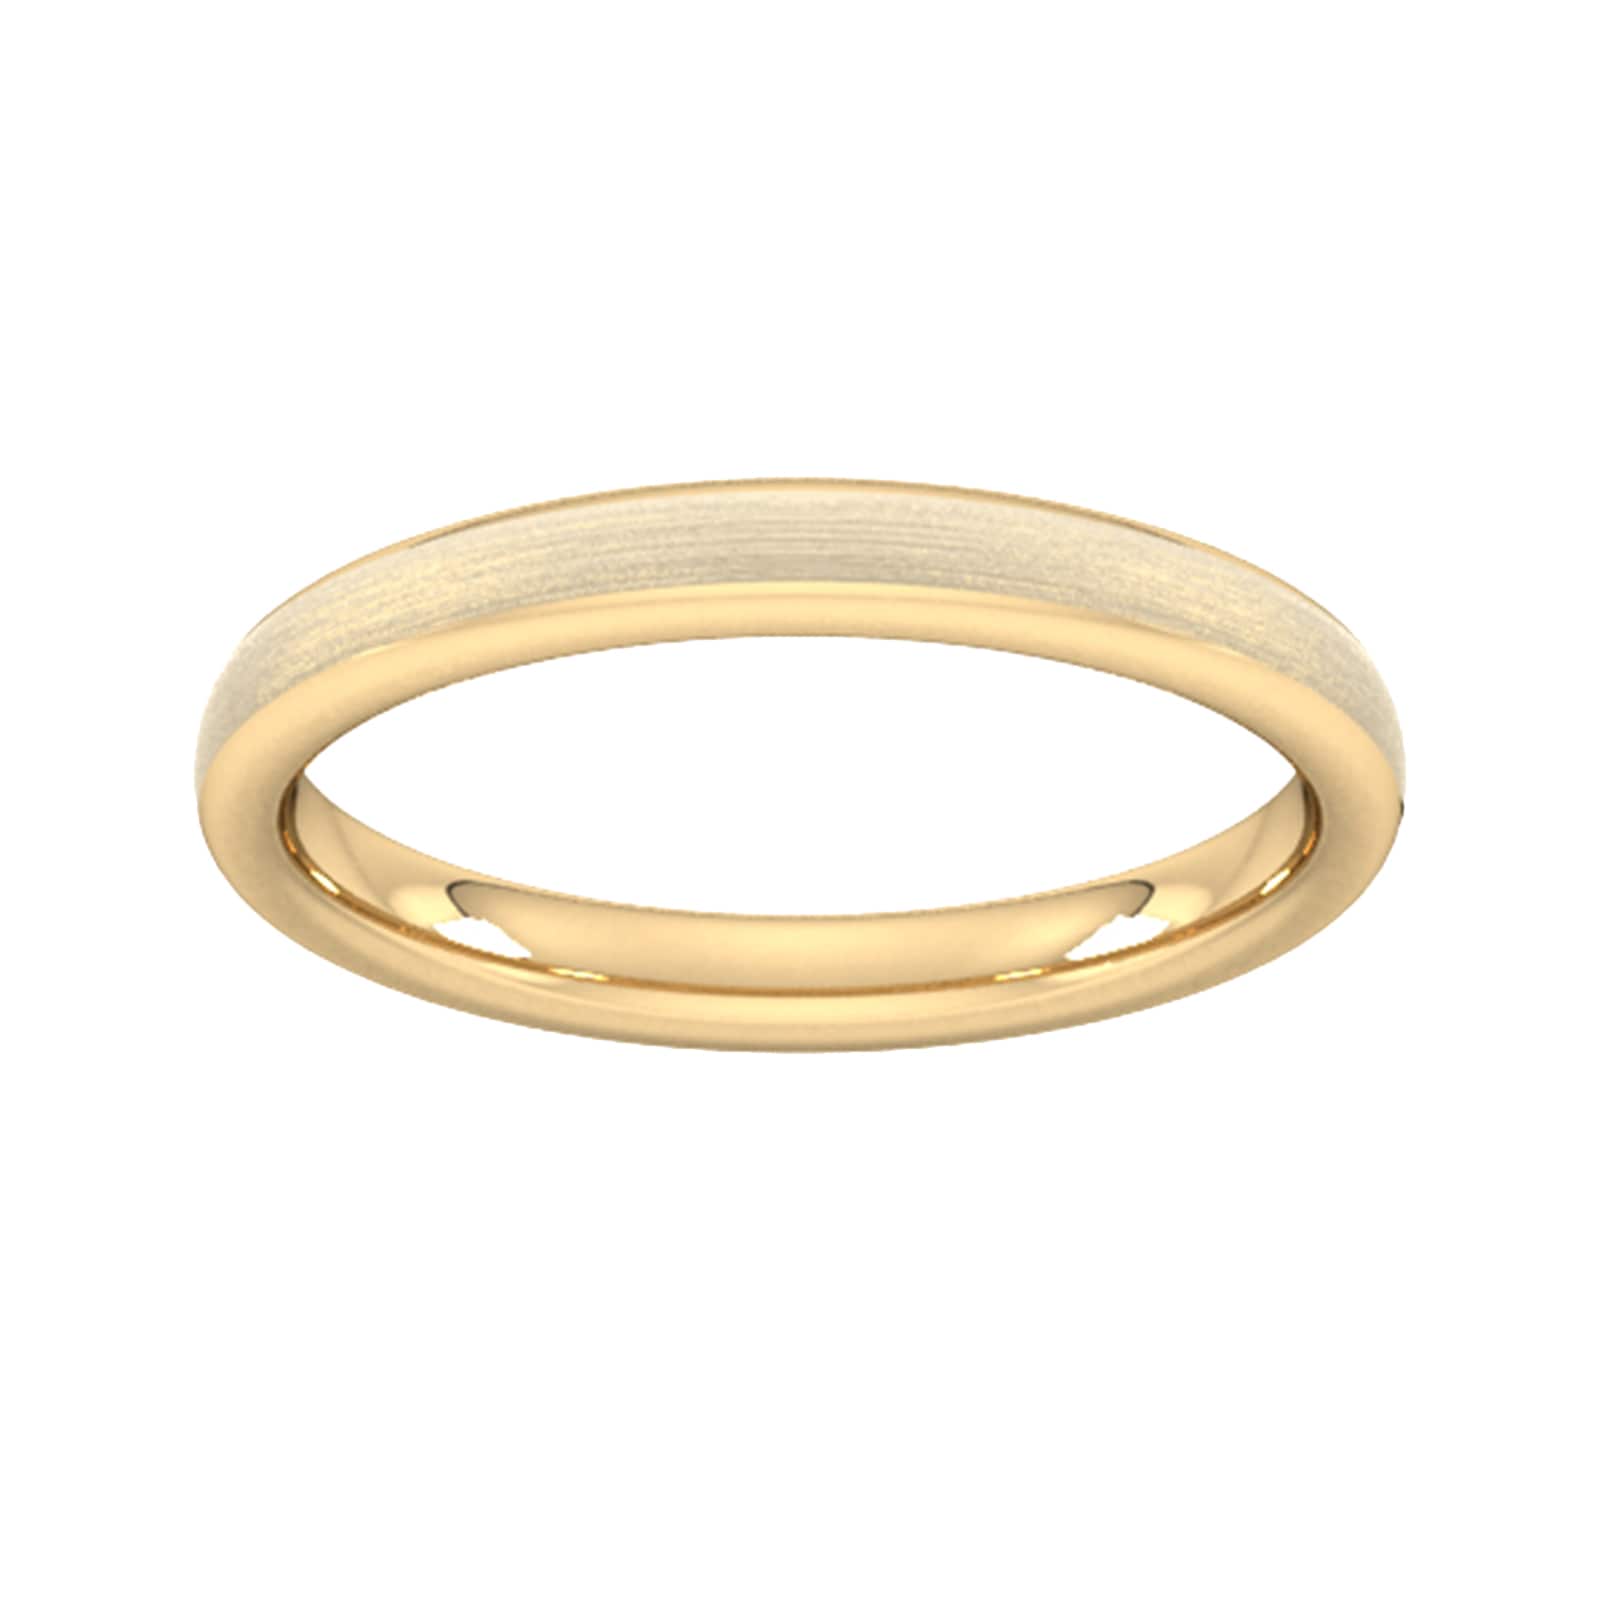 2.5mm Traditional Court Standard Matt Finished Wedding Ring In 18 Carat Yellow Gold - Ring Size H